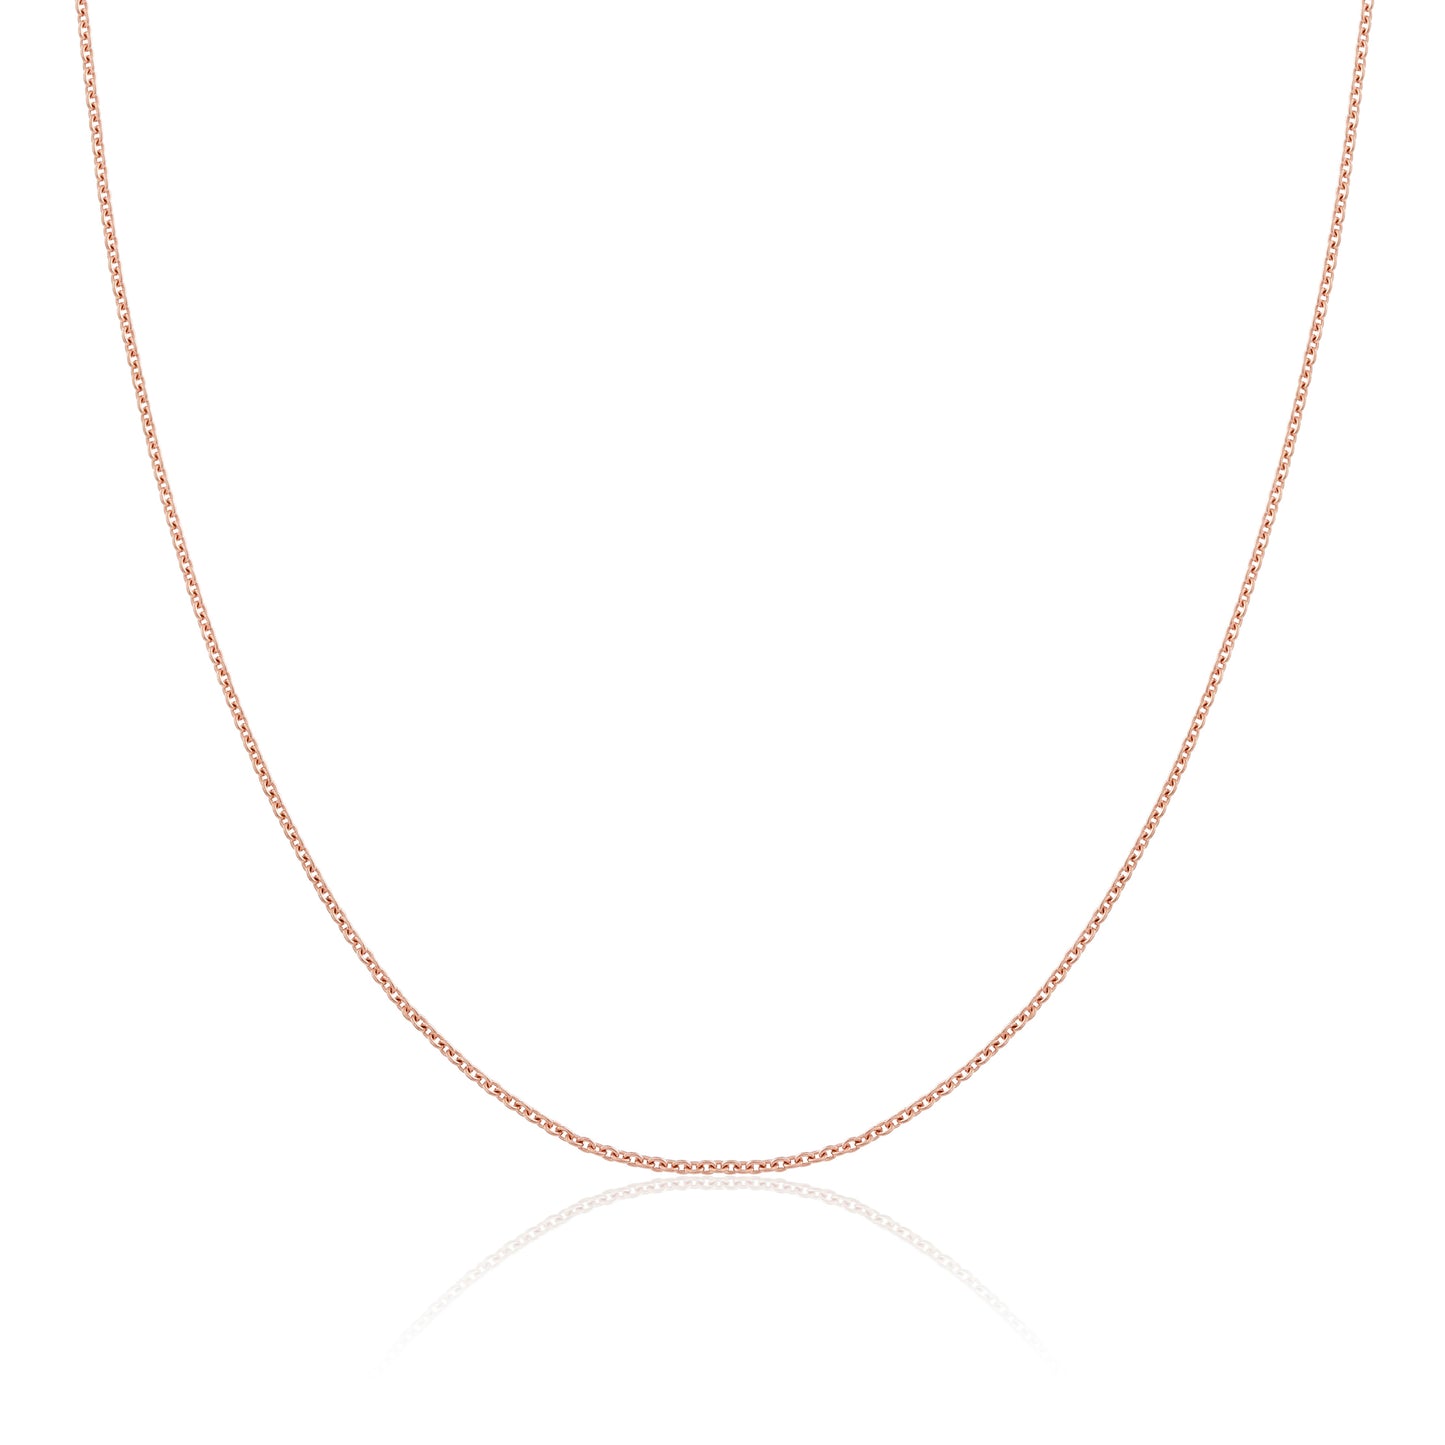 Rose Gold Plated Sterling Silver 1mm Belcher Chain 16 - 24 Inches